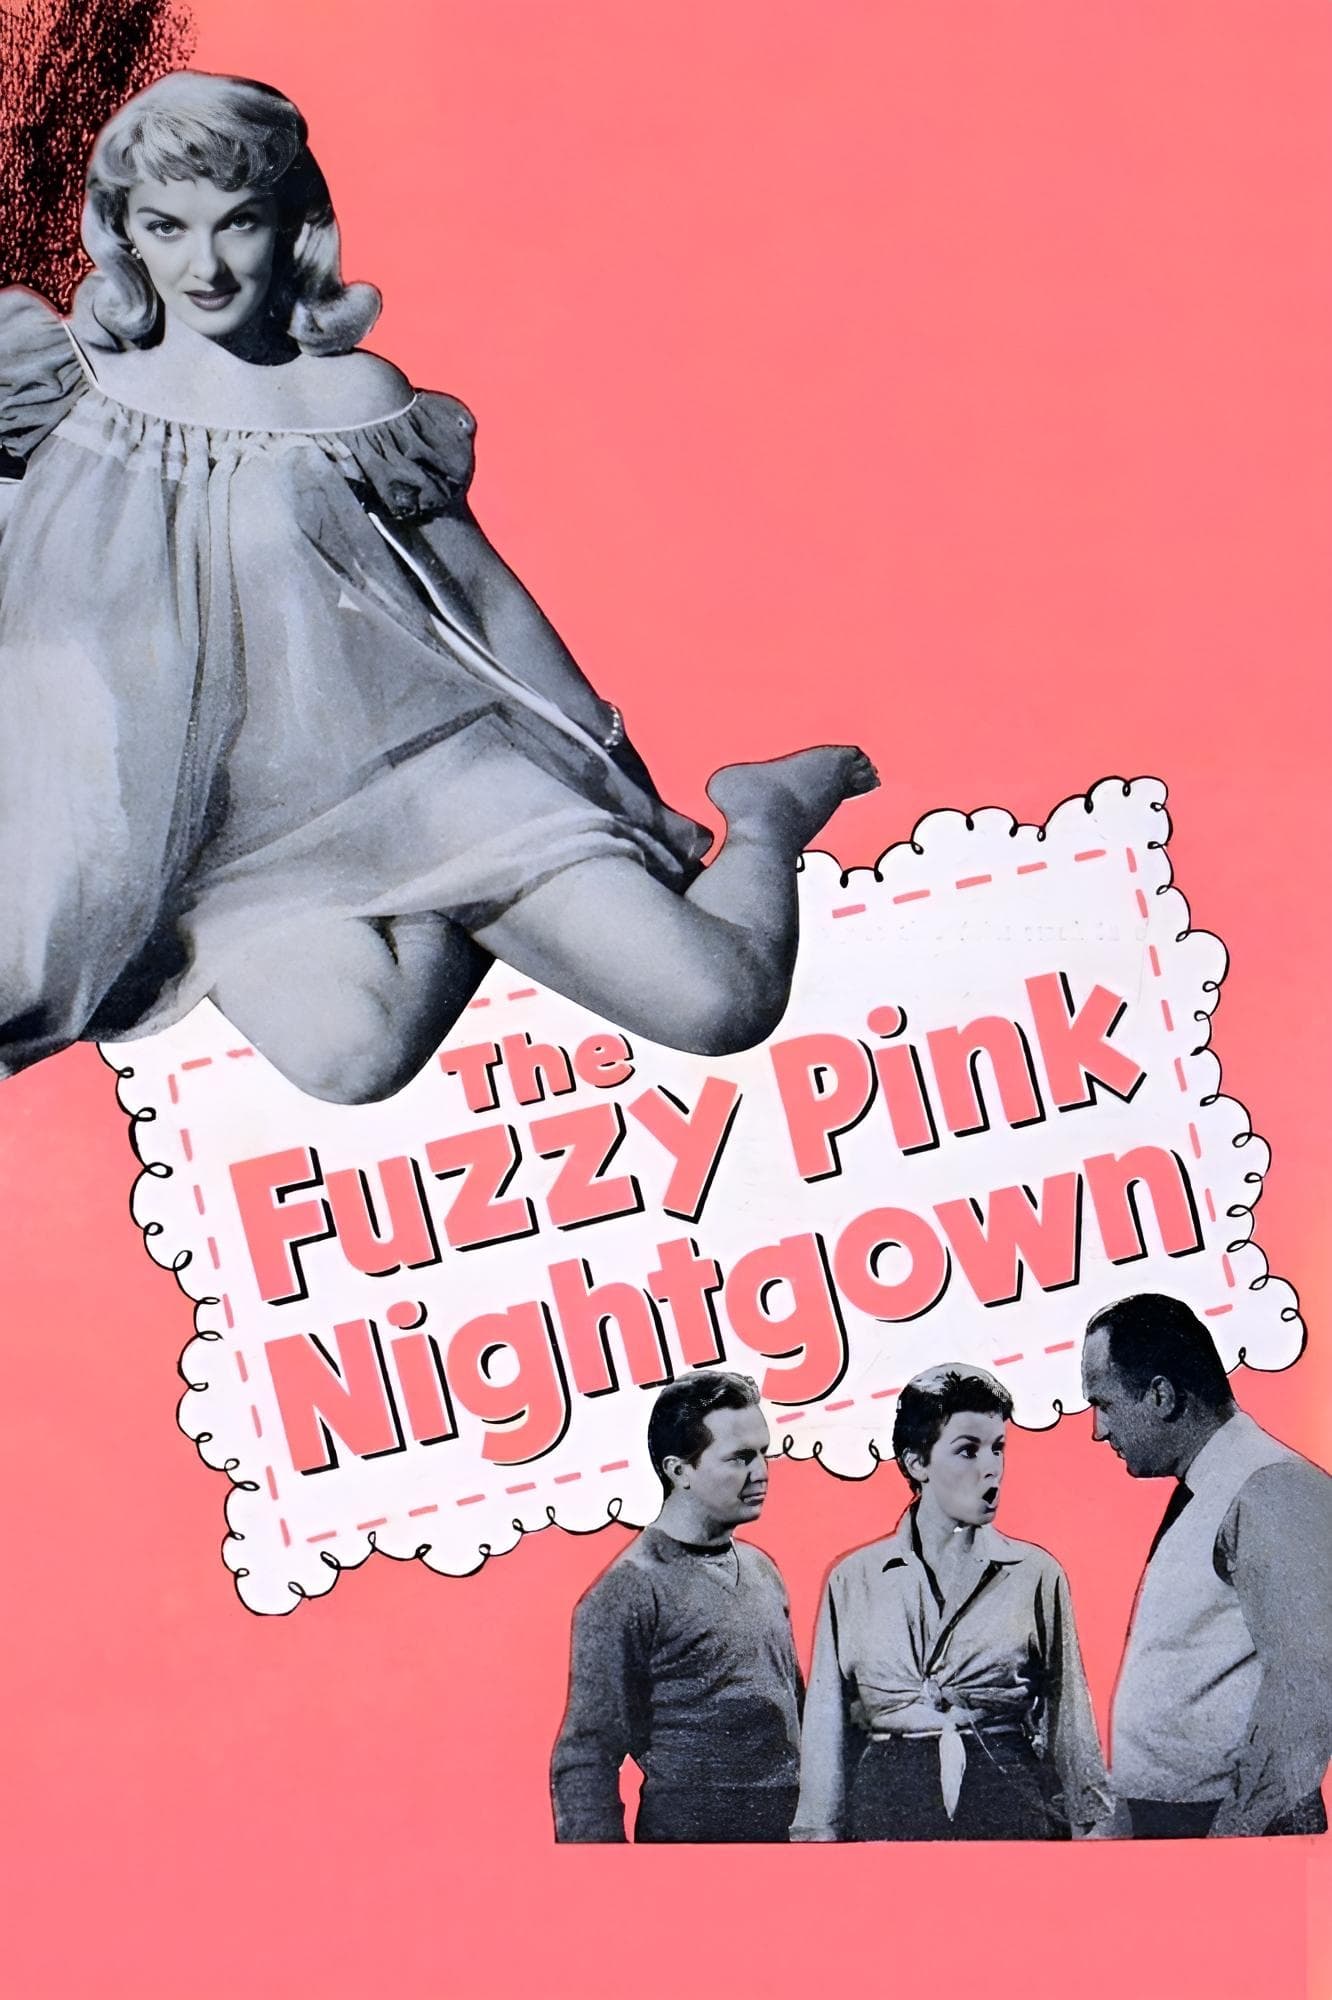 The Fuzzy Pink Nightgown